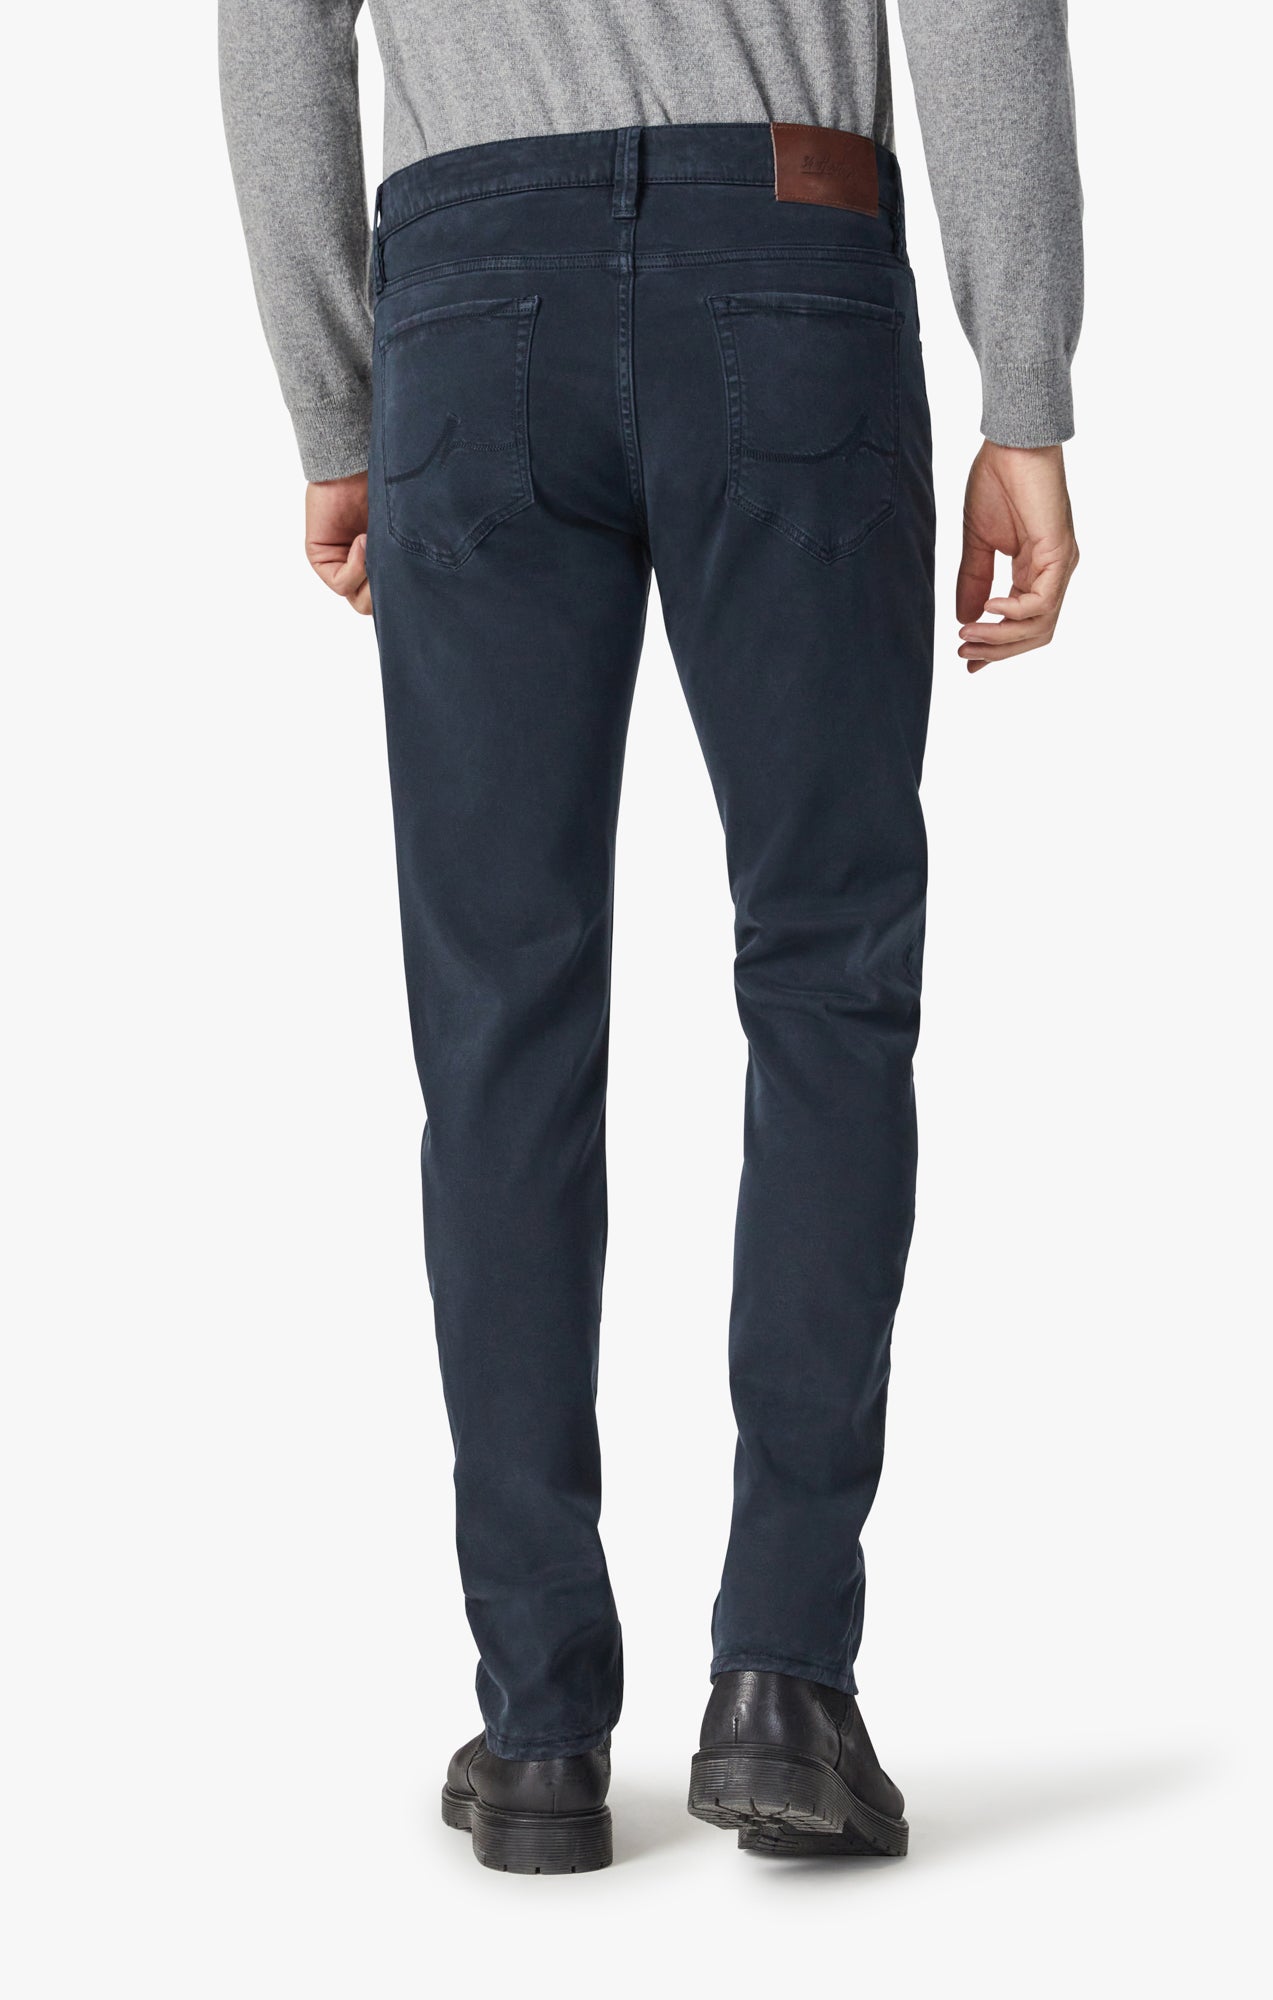 Cool Tapered Leg Pants in Navy Brushed Twill Image 4